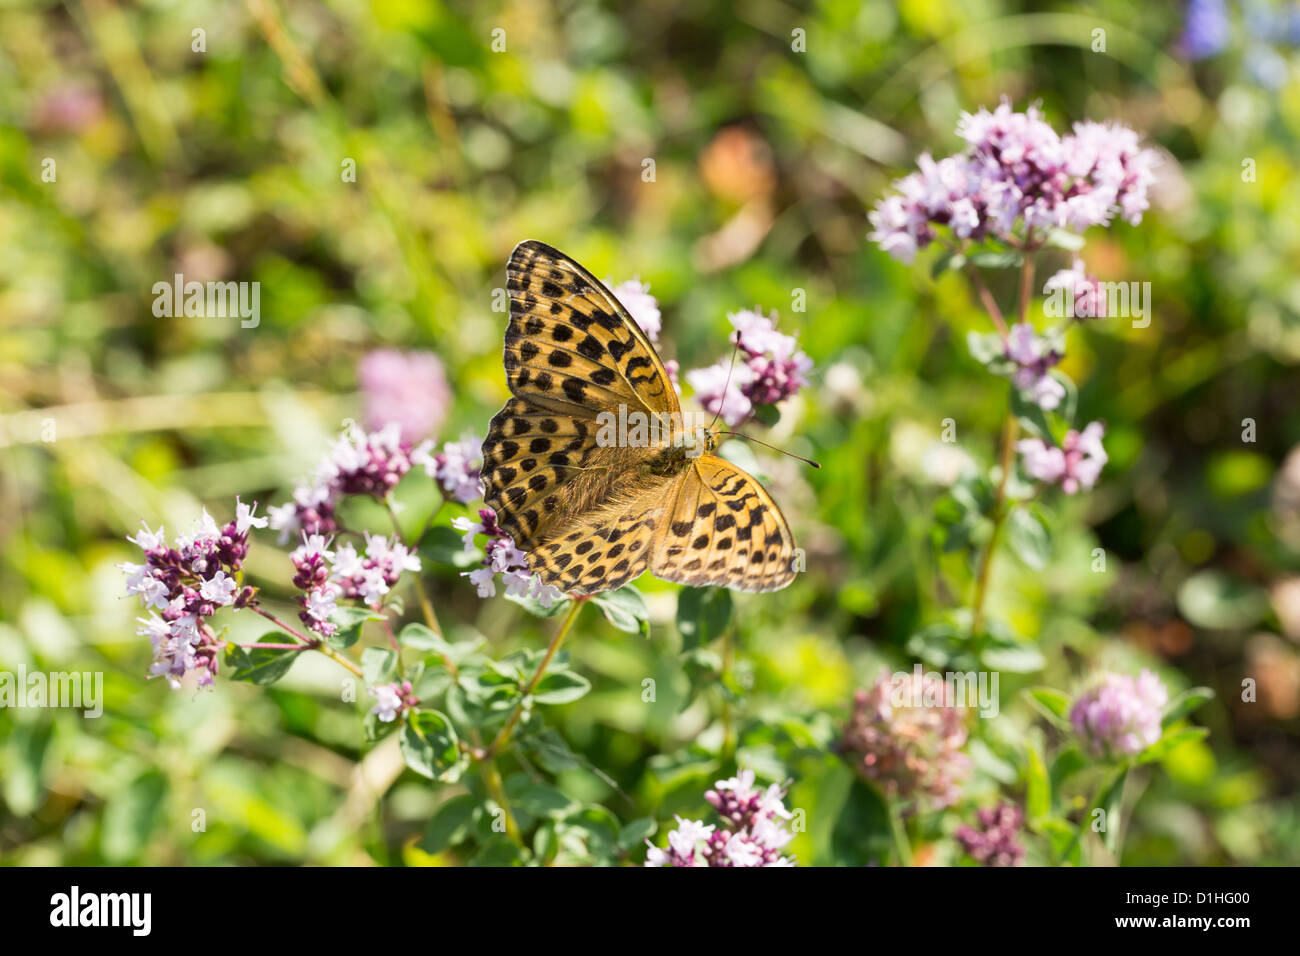 butterfly on a flower in nature, flora and fauna Stock Photo